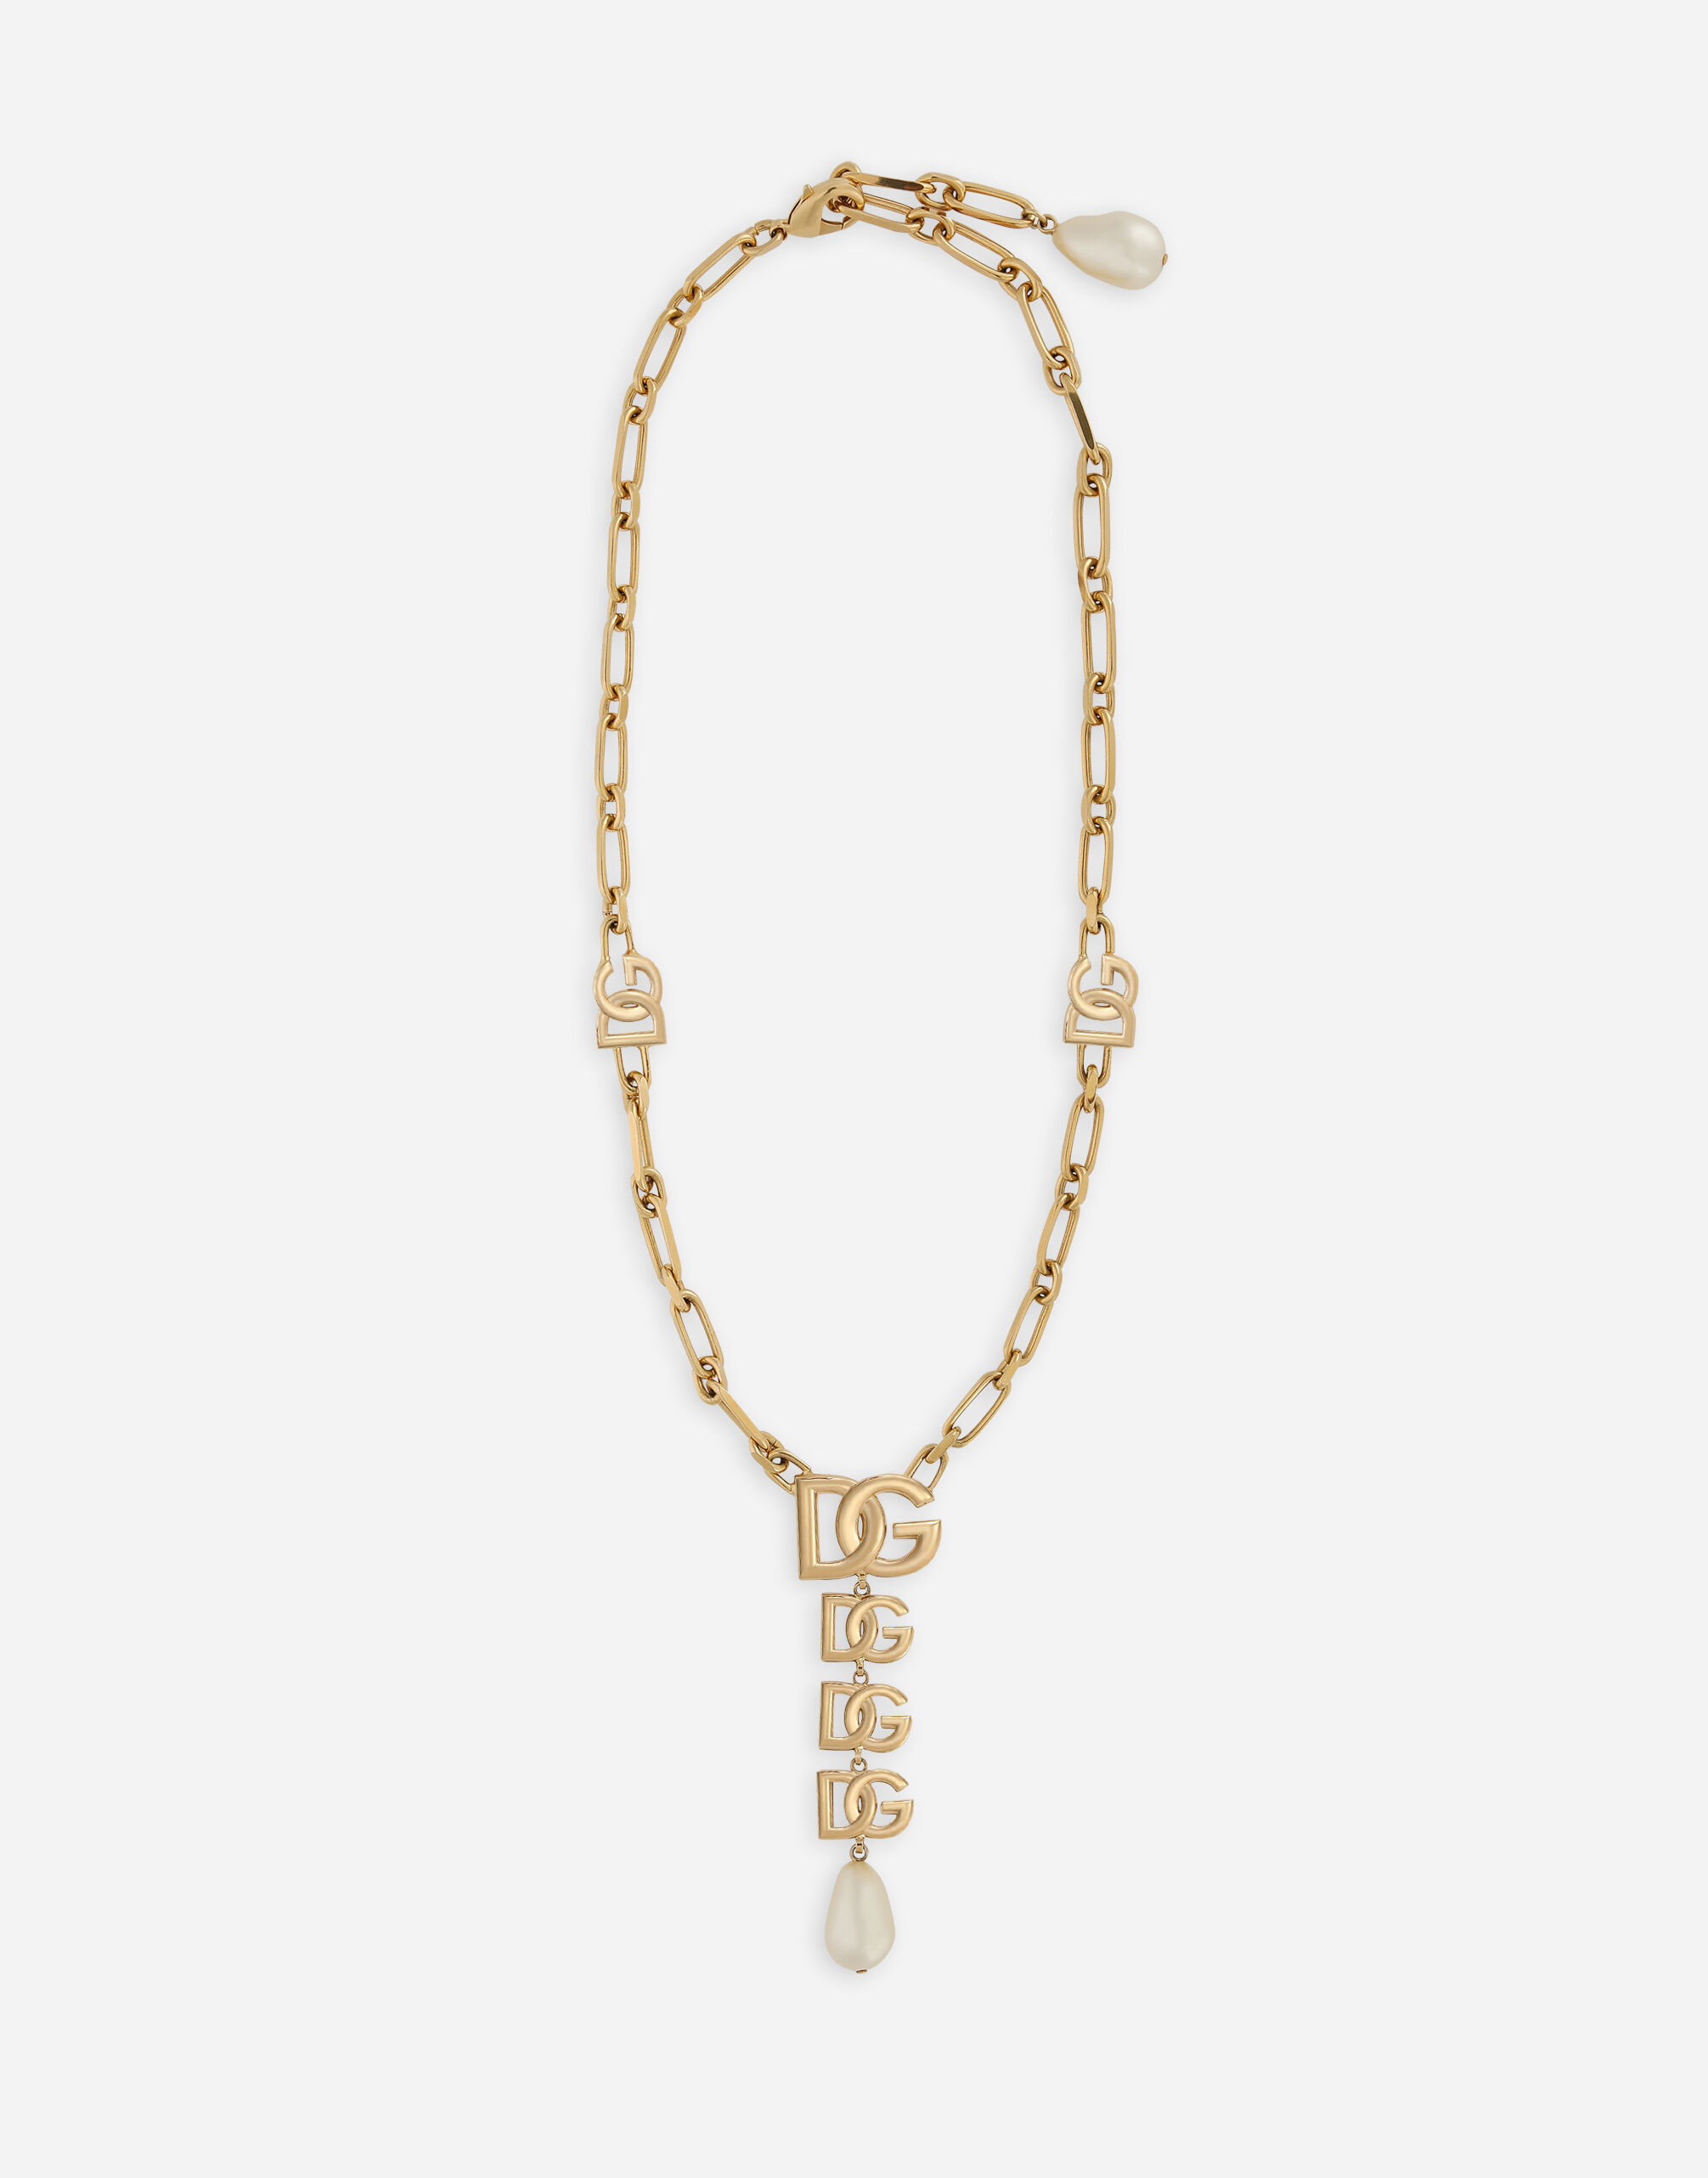 Dolce & Gabbana Necklace with DG logo pendant and pearl embellishment Black BB6003A1001